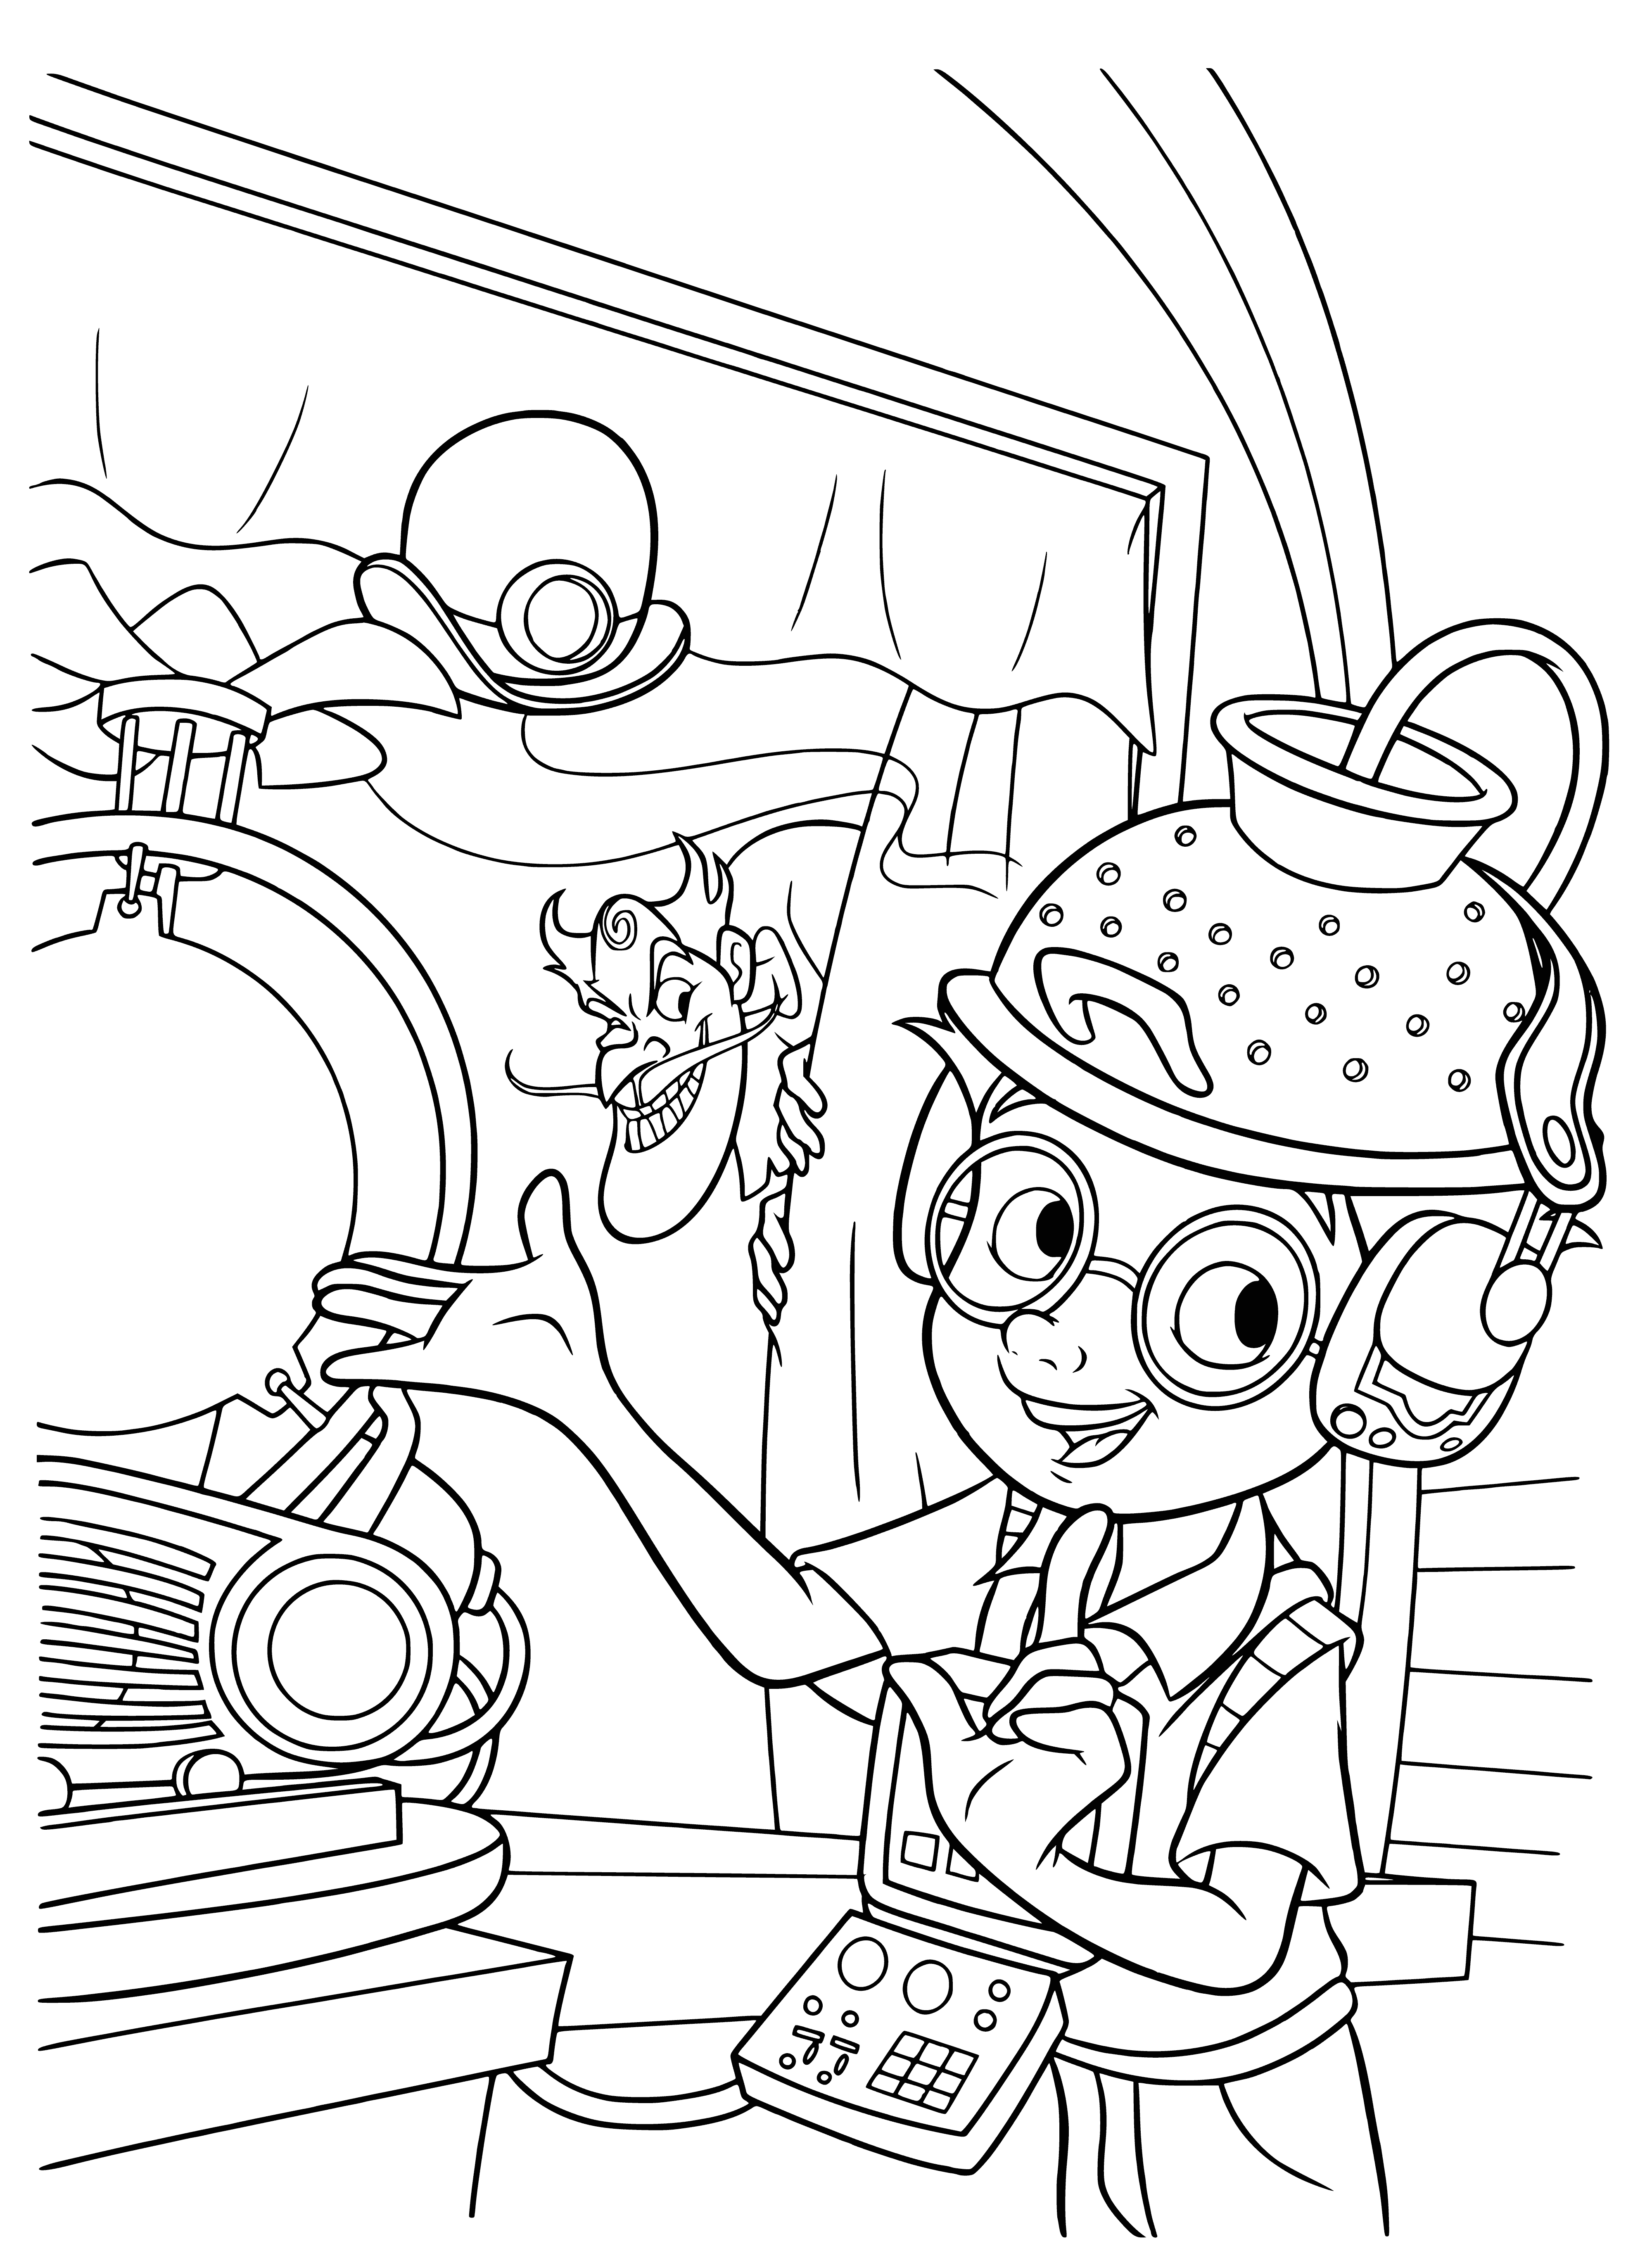 coloring page: Boy holds device w/ large wheel & helmet w/ visor. Wheel has intricate design w/ cogs & a crank.